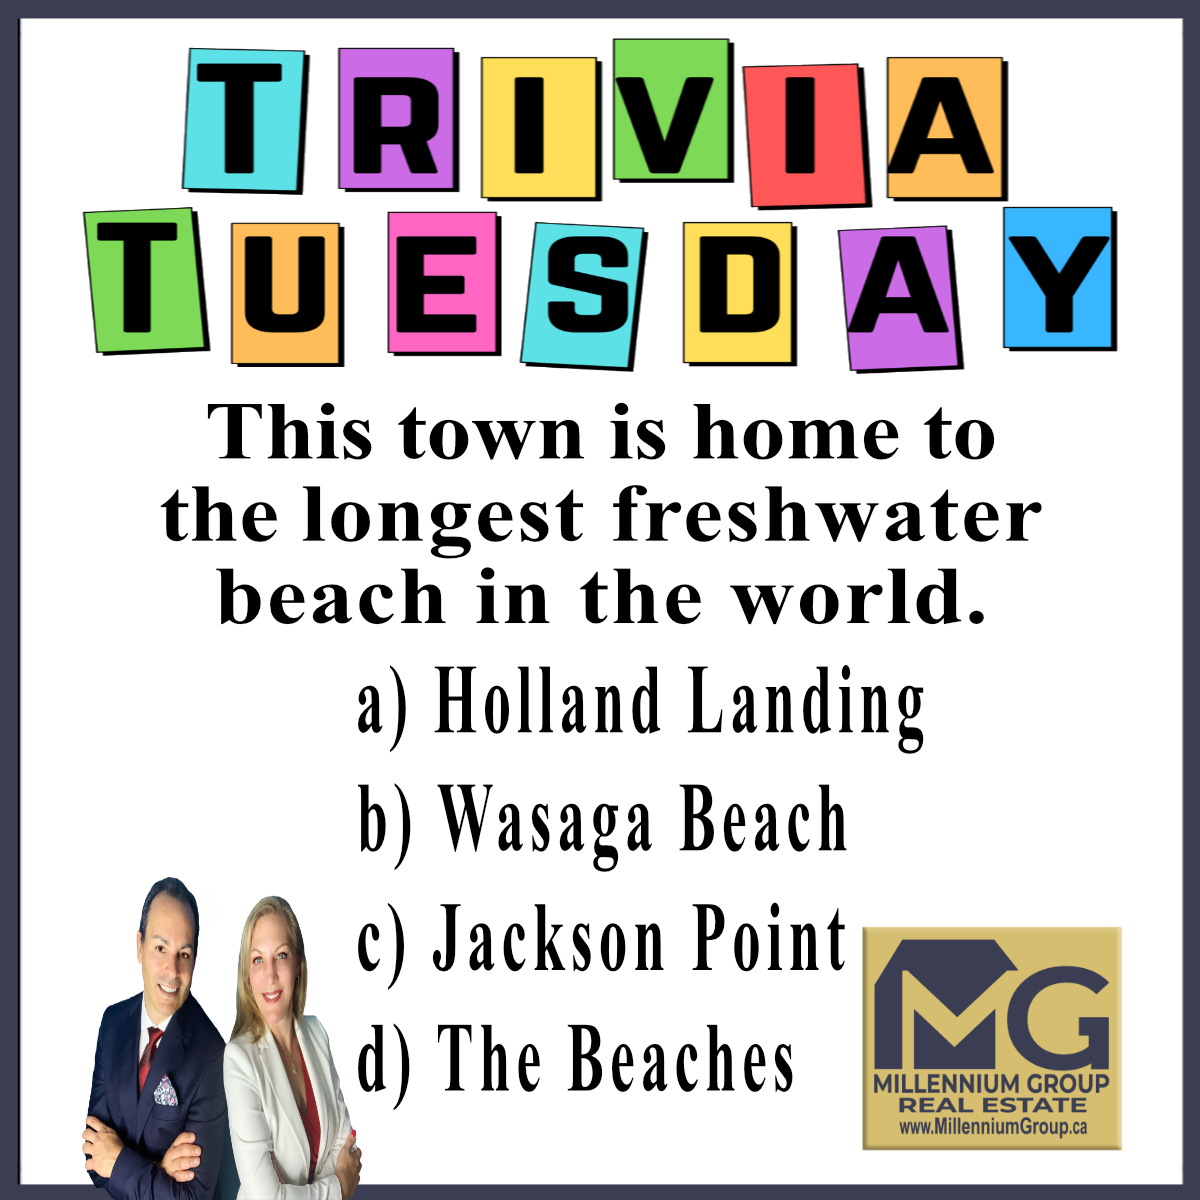 No longer a cottage town, this area is now inhabited year round and growing into a full fledged city 🏖

#NeighbourhoodTrivia #OntarioTrivia #TorontoTrivia #TriviaTuesday #TuesdayTrivia #WorldTrivia #CanadaTrivia #KendraCutroneBroker #TonyCutroneRealtor #MillenniumGroupRealtors